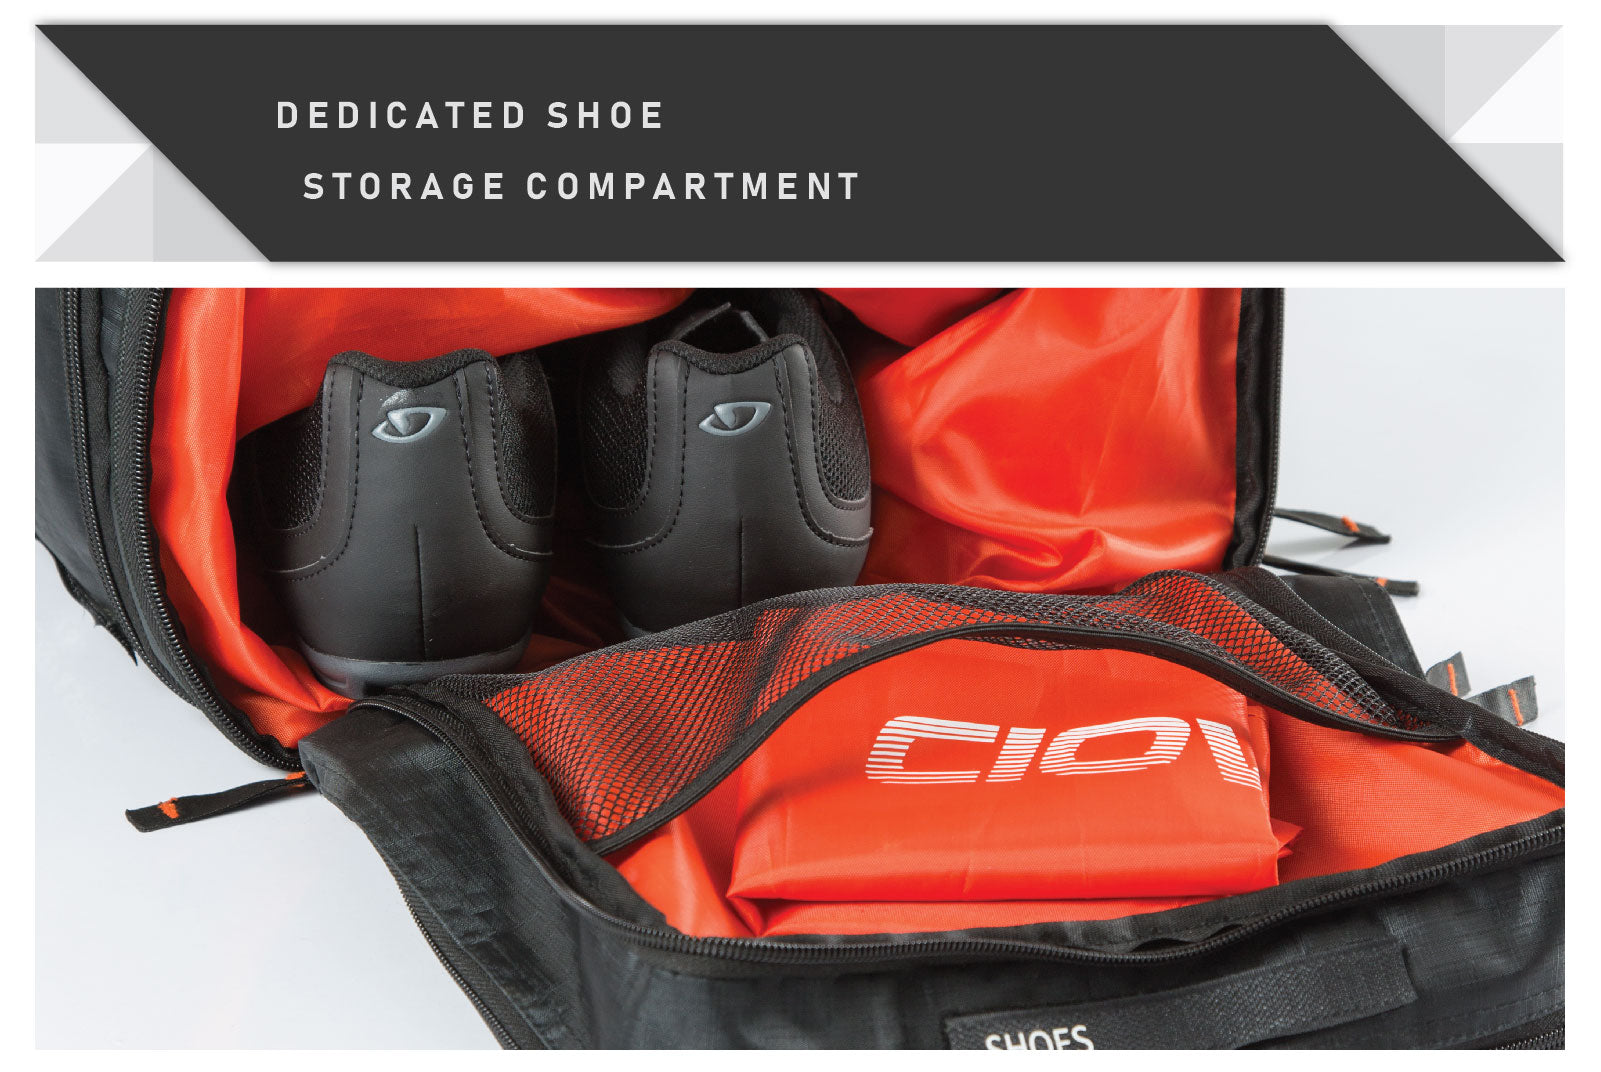 Cycling kit bag with shoe storage